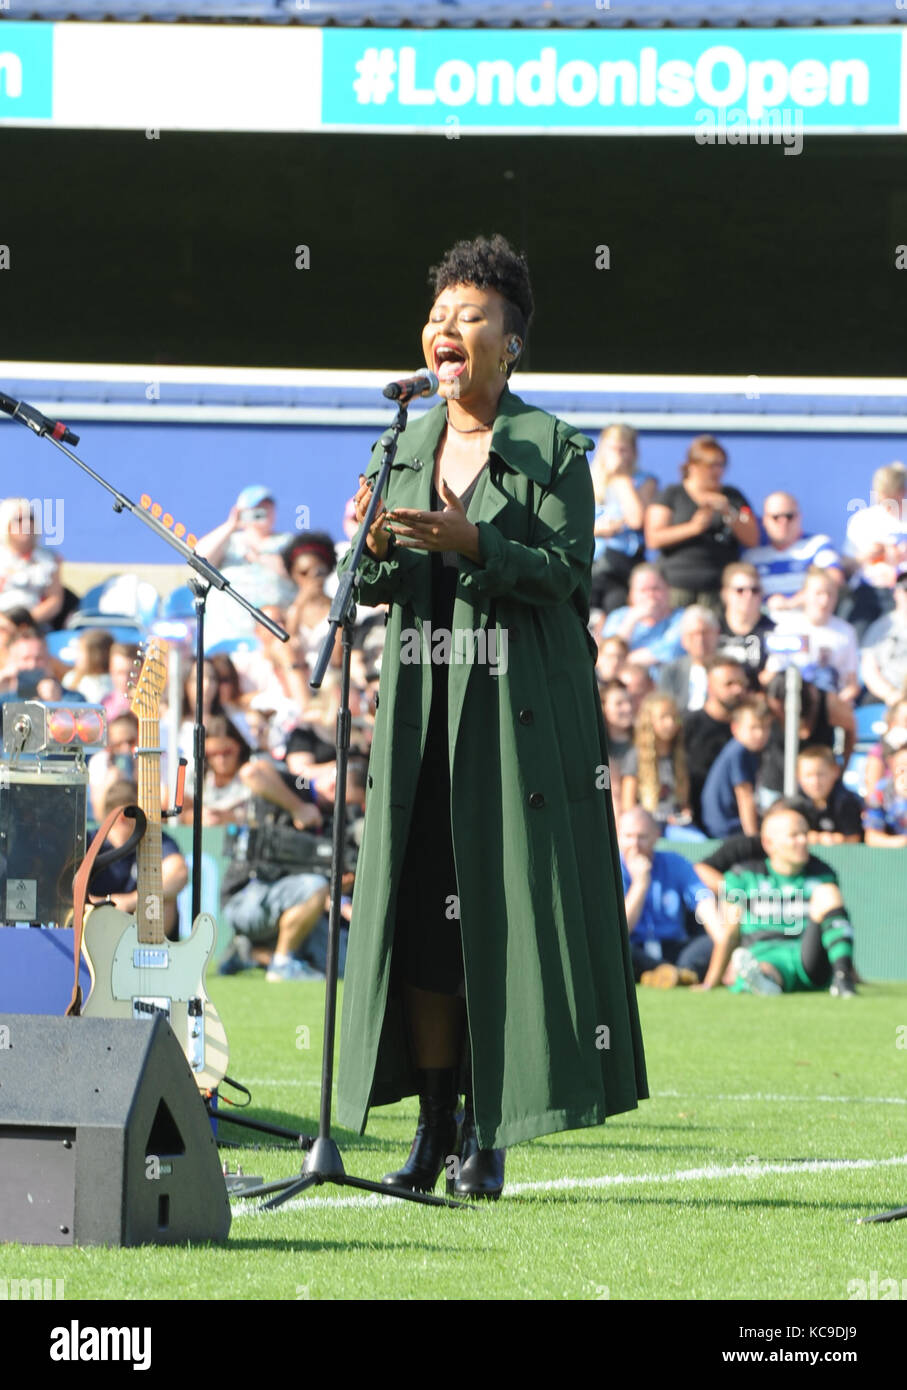 Game for Grenfell, at Loftus Road Stadium, celebrities, family members from Grenfell and members of the emergency services took part tin the match, with a special half time performance by Rita Ora  Featuring: Emeli Sande Where: London, United Kingdom When: 02 Sep 2017 Credit: WENN.com Stock Photo